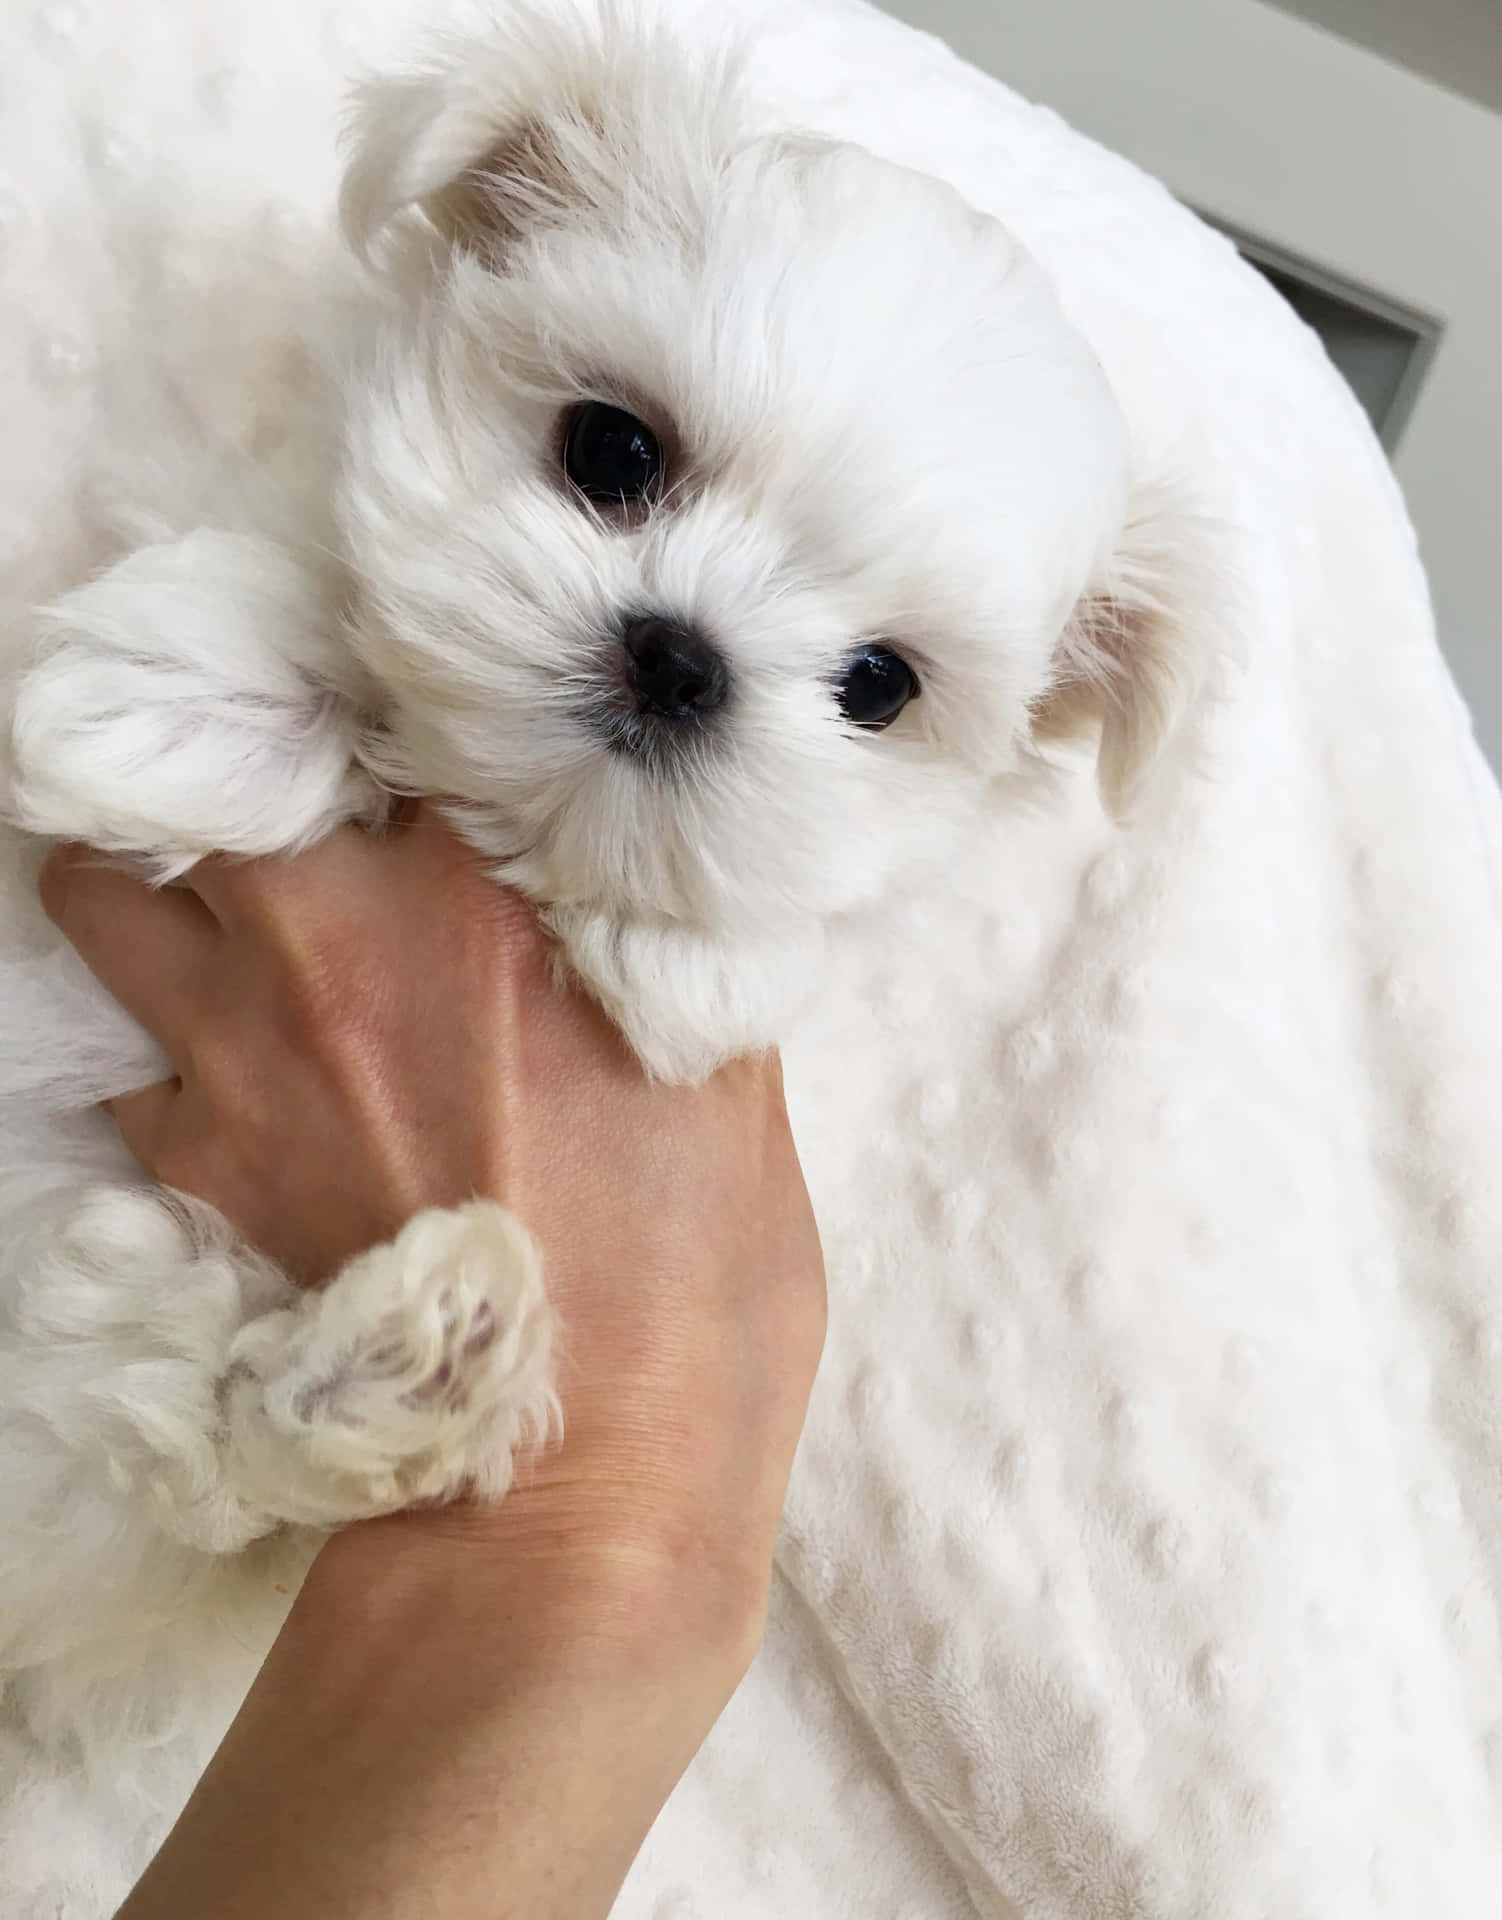 A tiny white Maltese puppy perched atop a knitted cushion